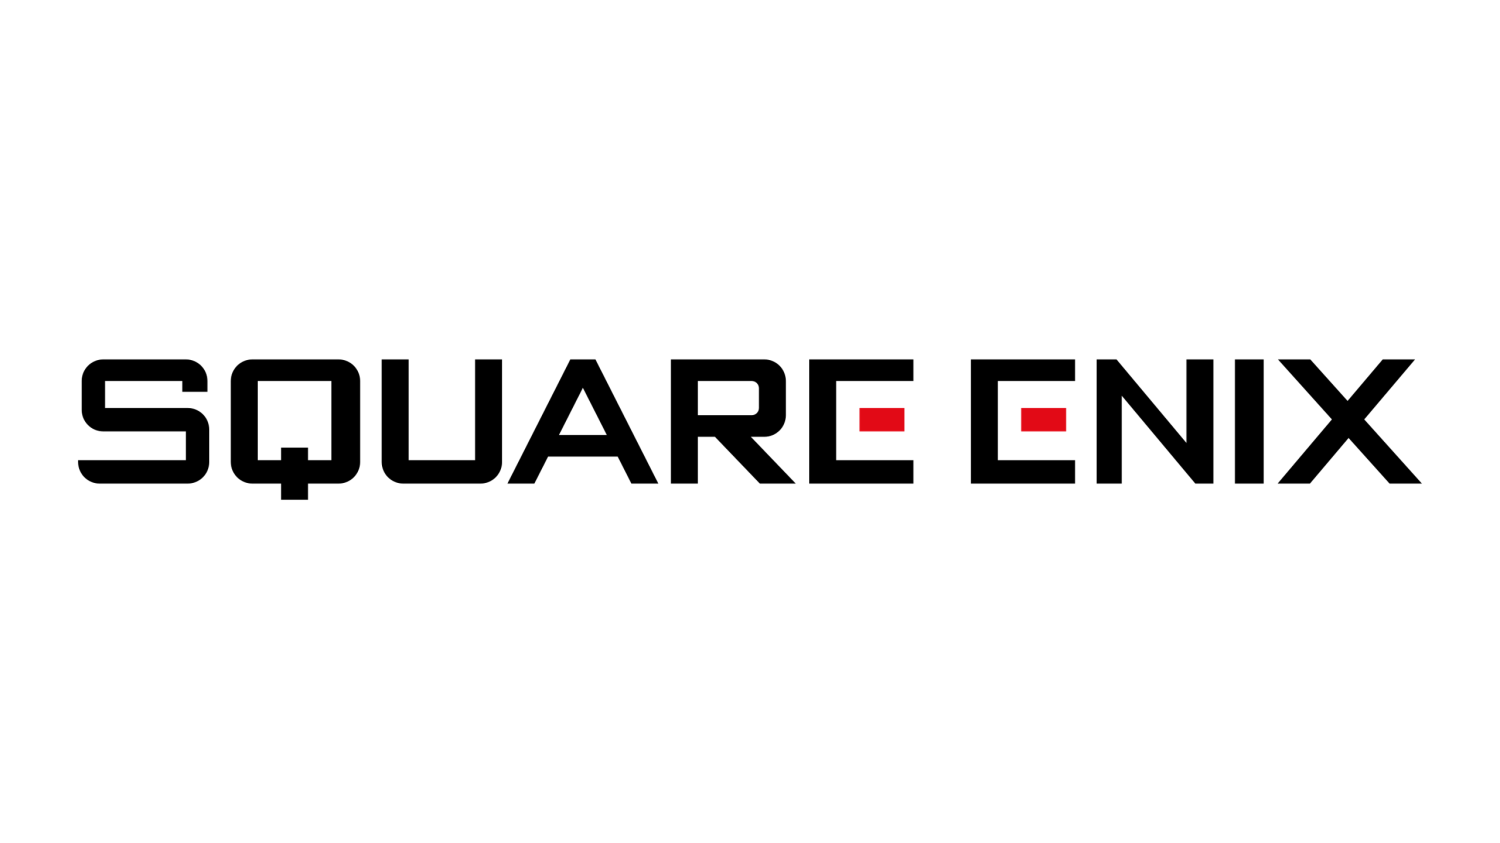 A week after selling its Western studios, Square Enix says it will